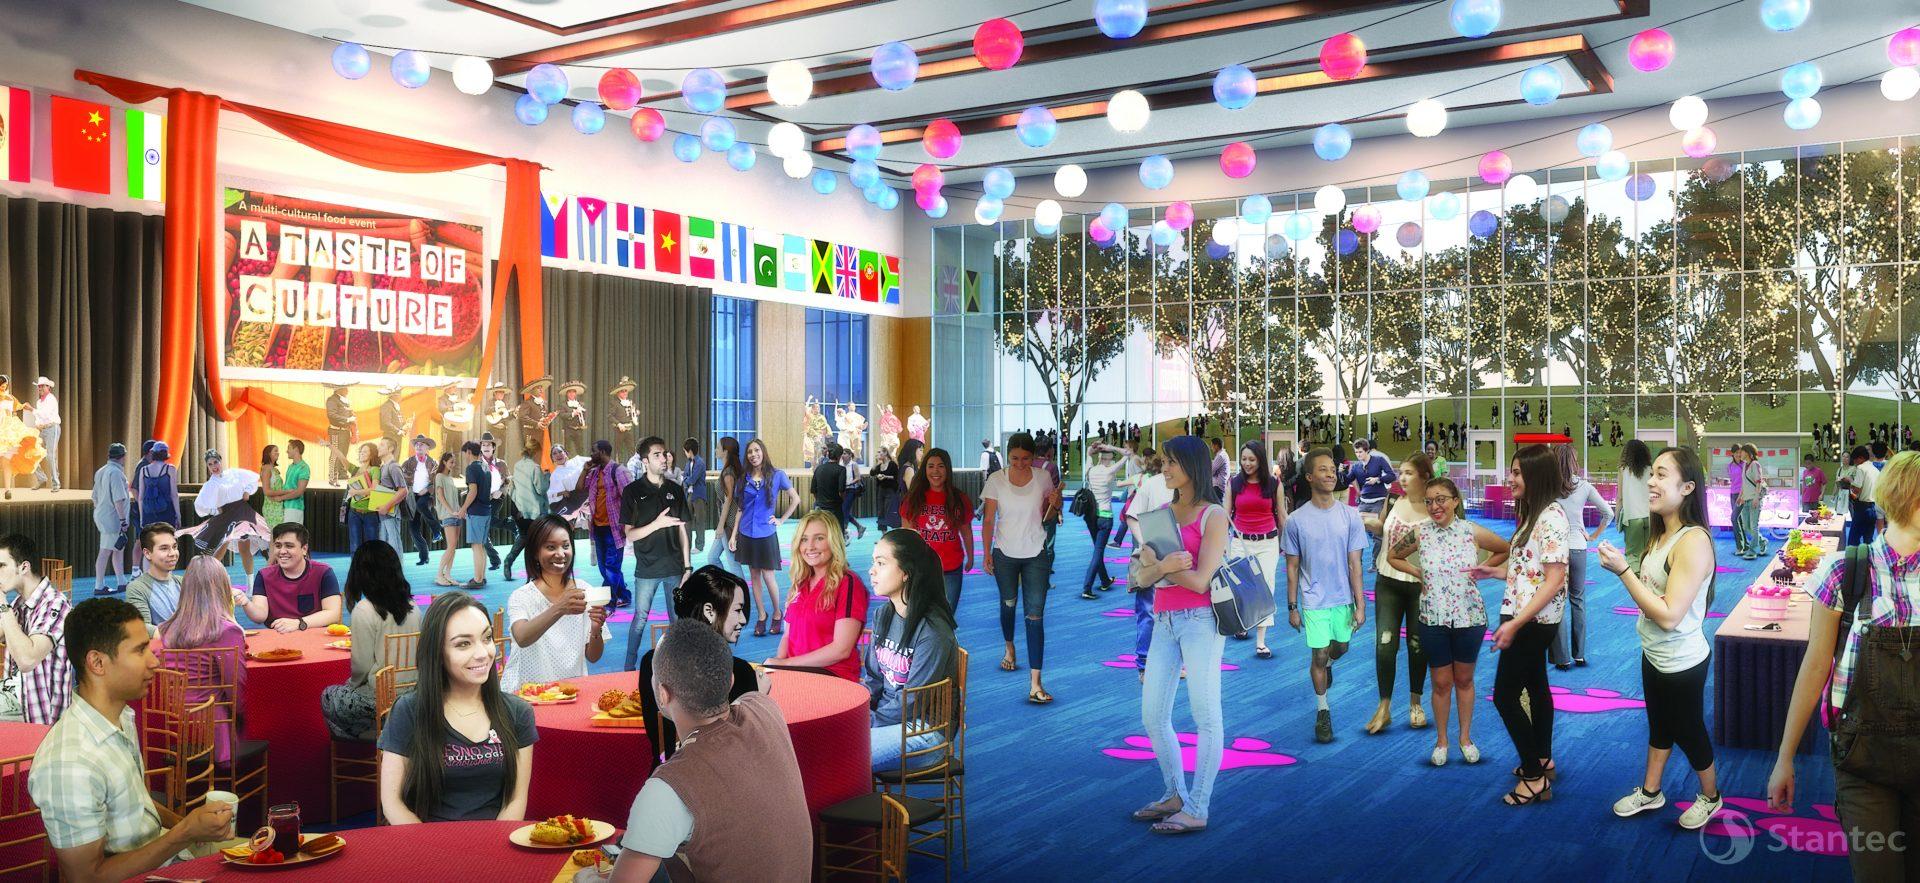 Renderings show a proposed ballroom inside the New USU. Students will get to vote on whether or not to build the project on campus on March 20-22. (University Student Union)